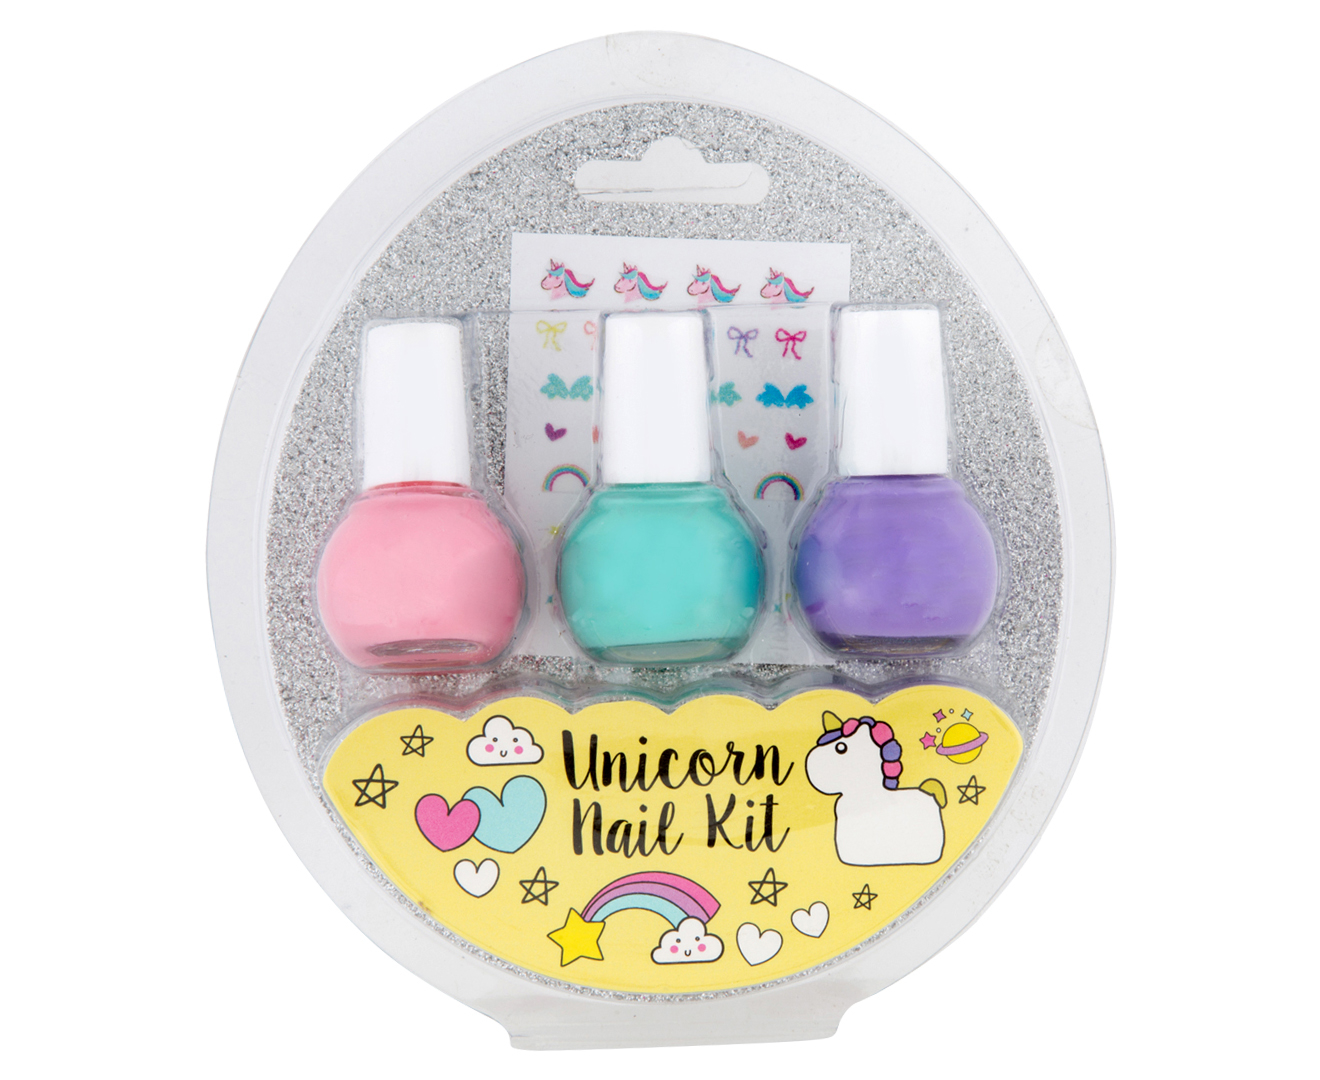 Unicorn Nail Art Kit - Complete Set with Nail Polish, Stickers, and Tools - wide 3